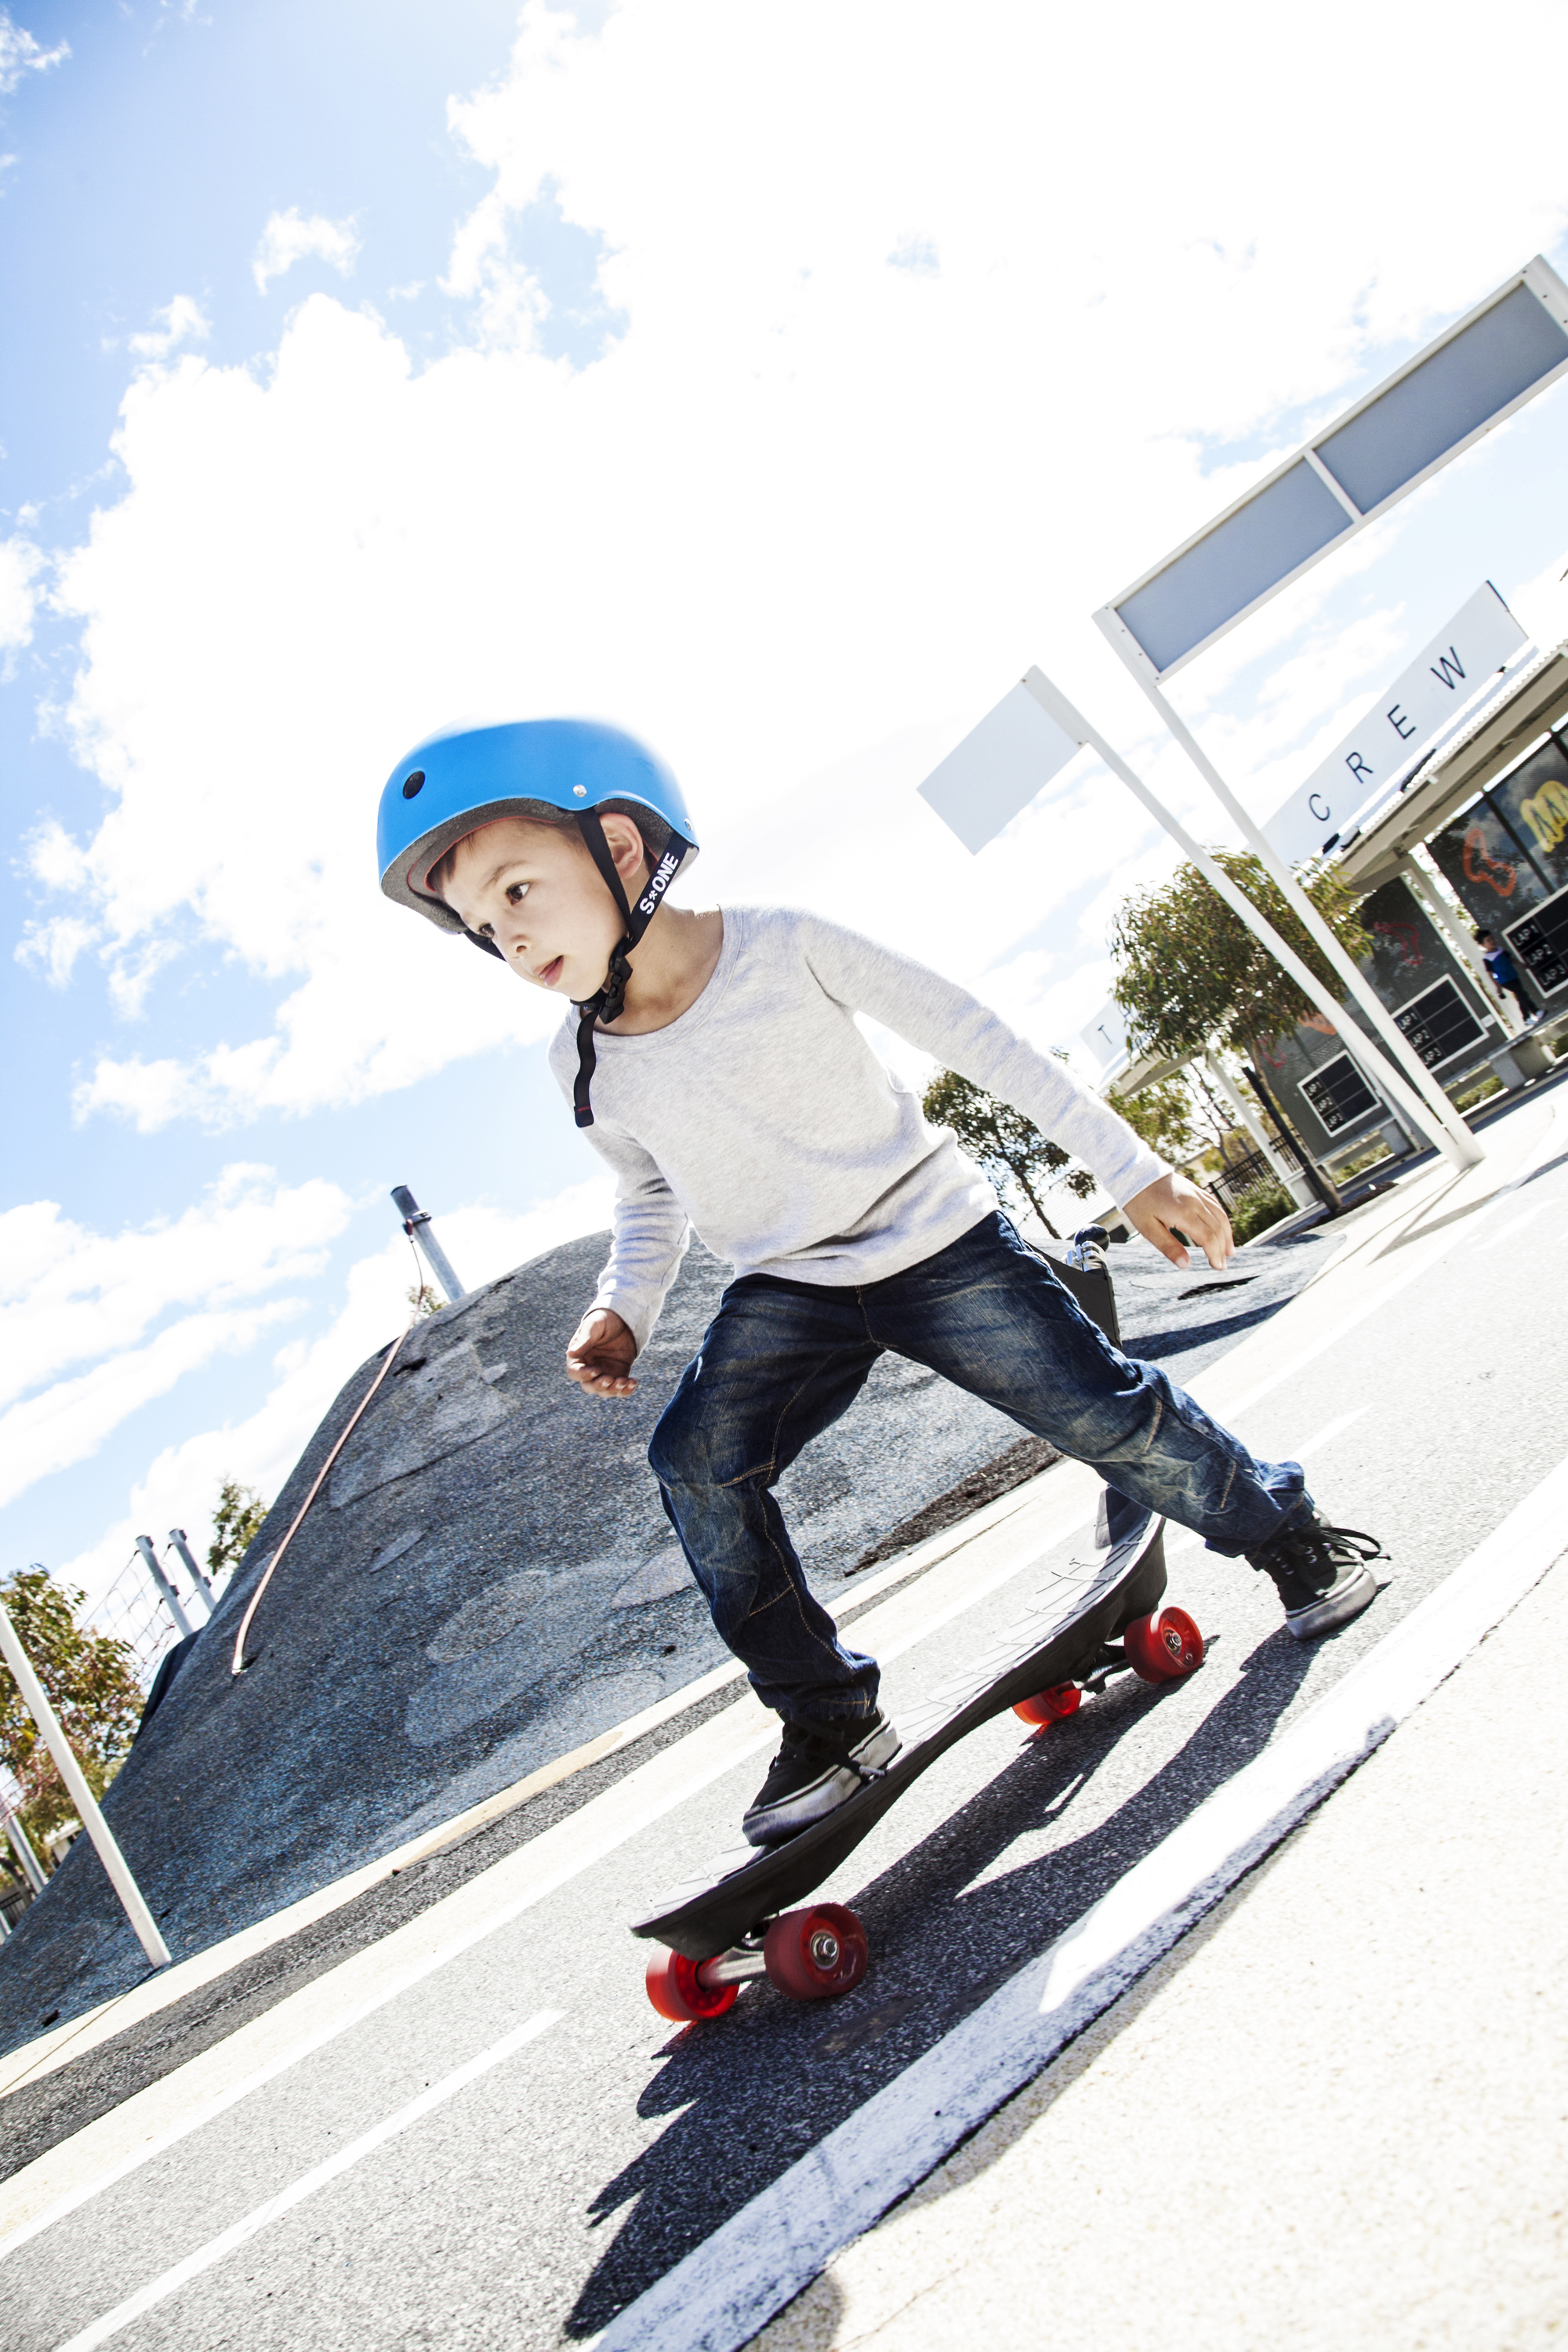 The ookkie™The World's Safest Skateboard for Kids | Newswire